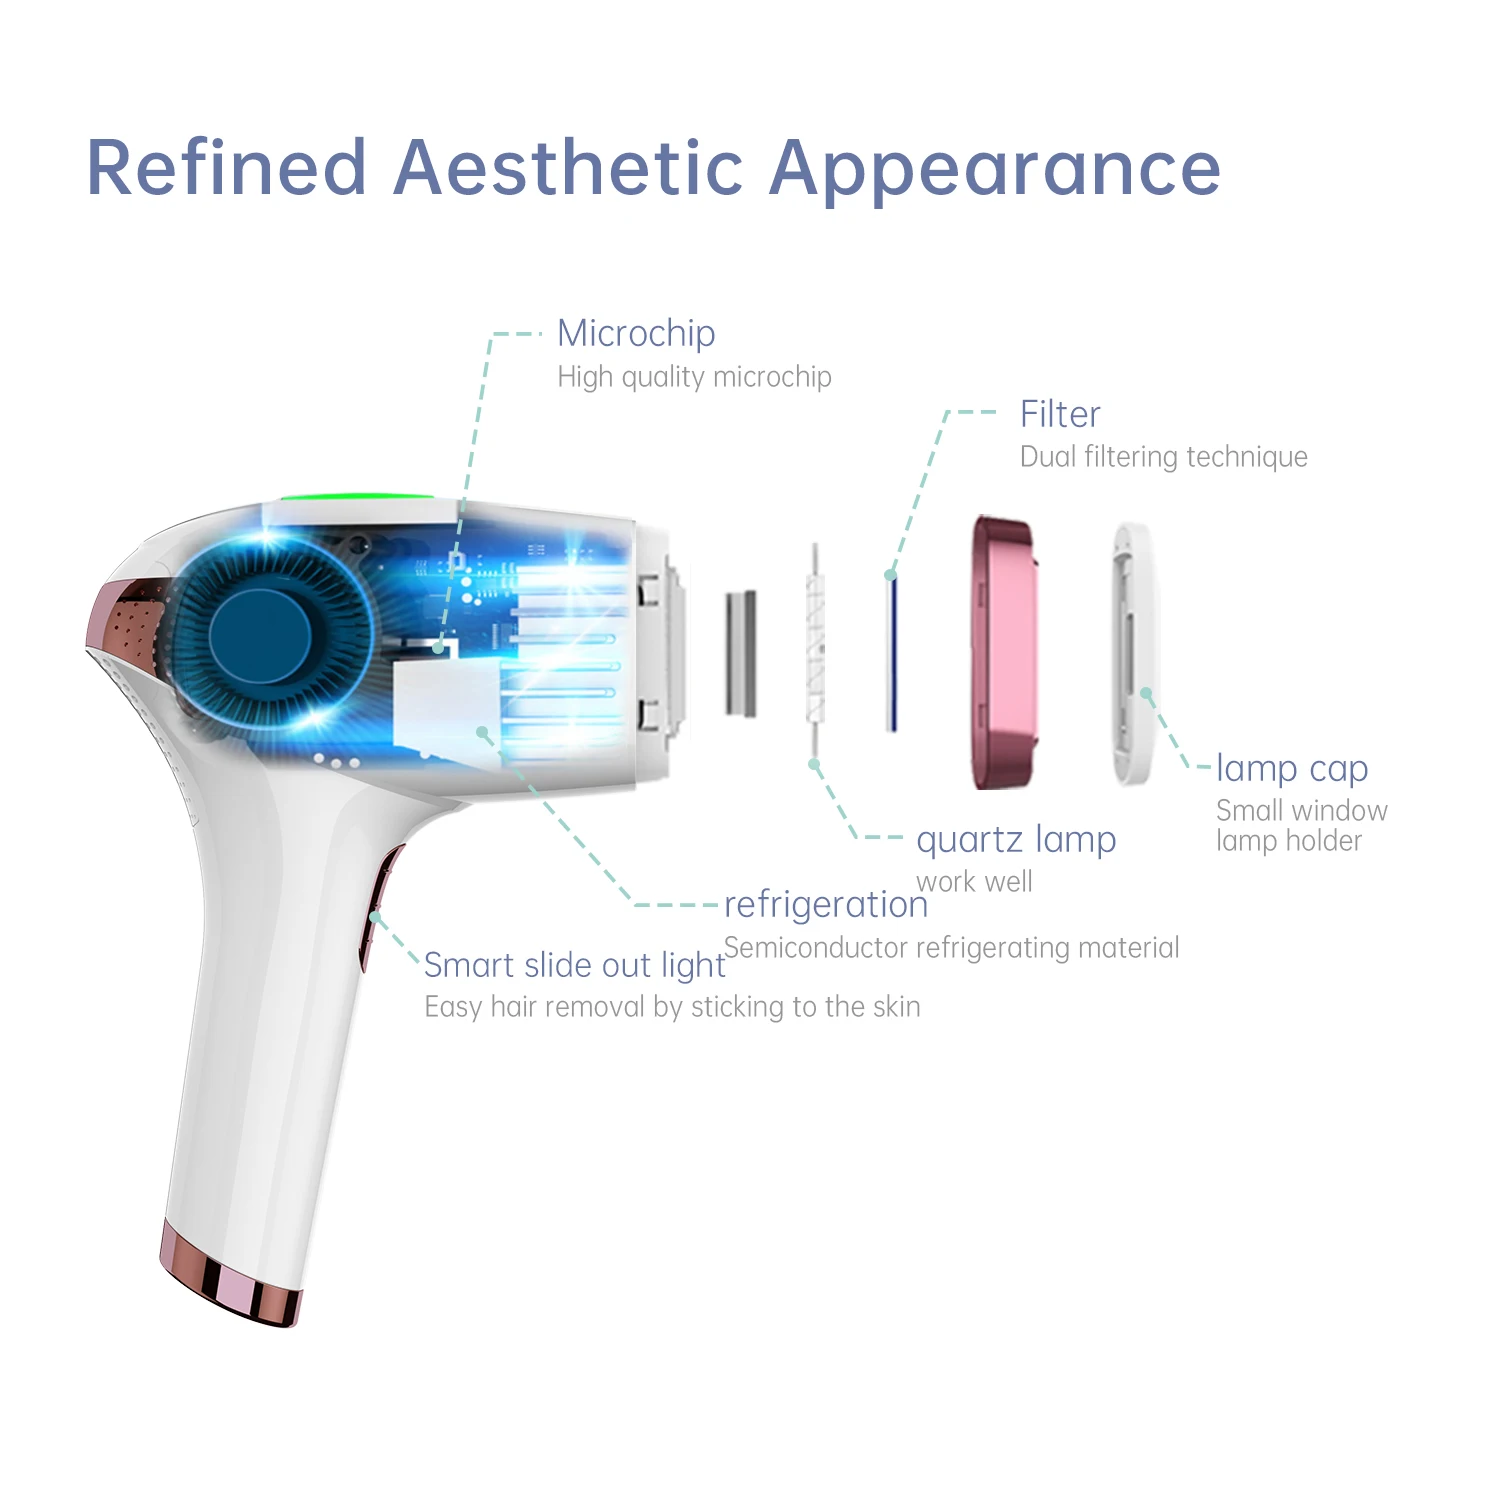 MLAY Full Body Hair Removal IPL Laser Epilator 500000 Flashes Cooling and Ice Cool Features UK Plug Type for Home Use